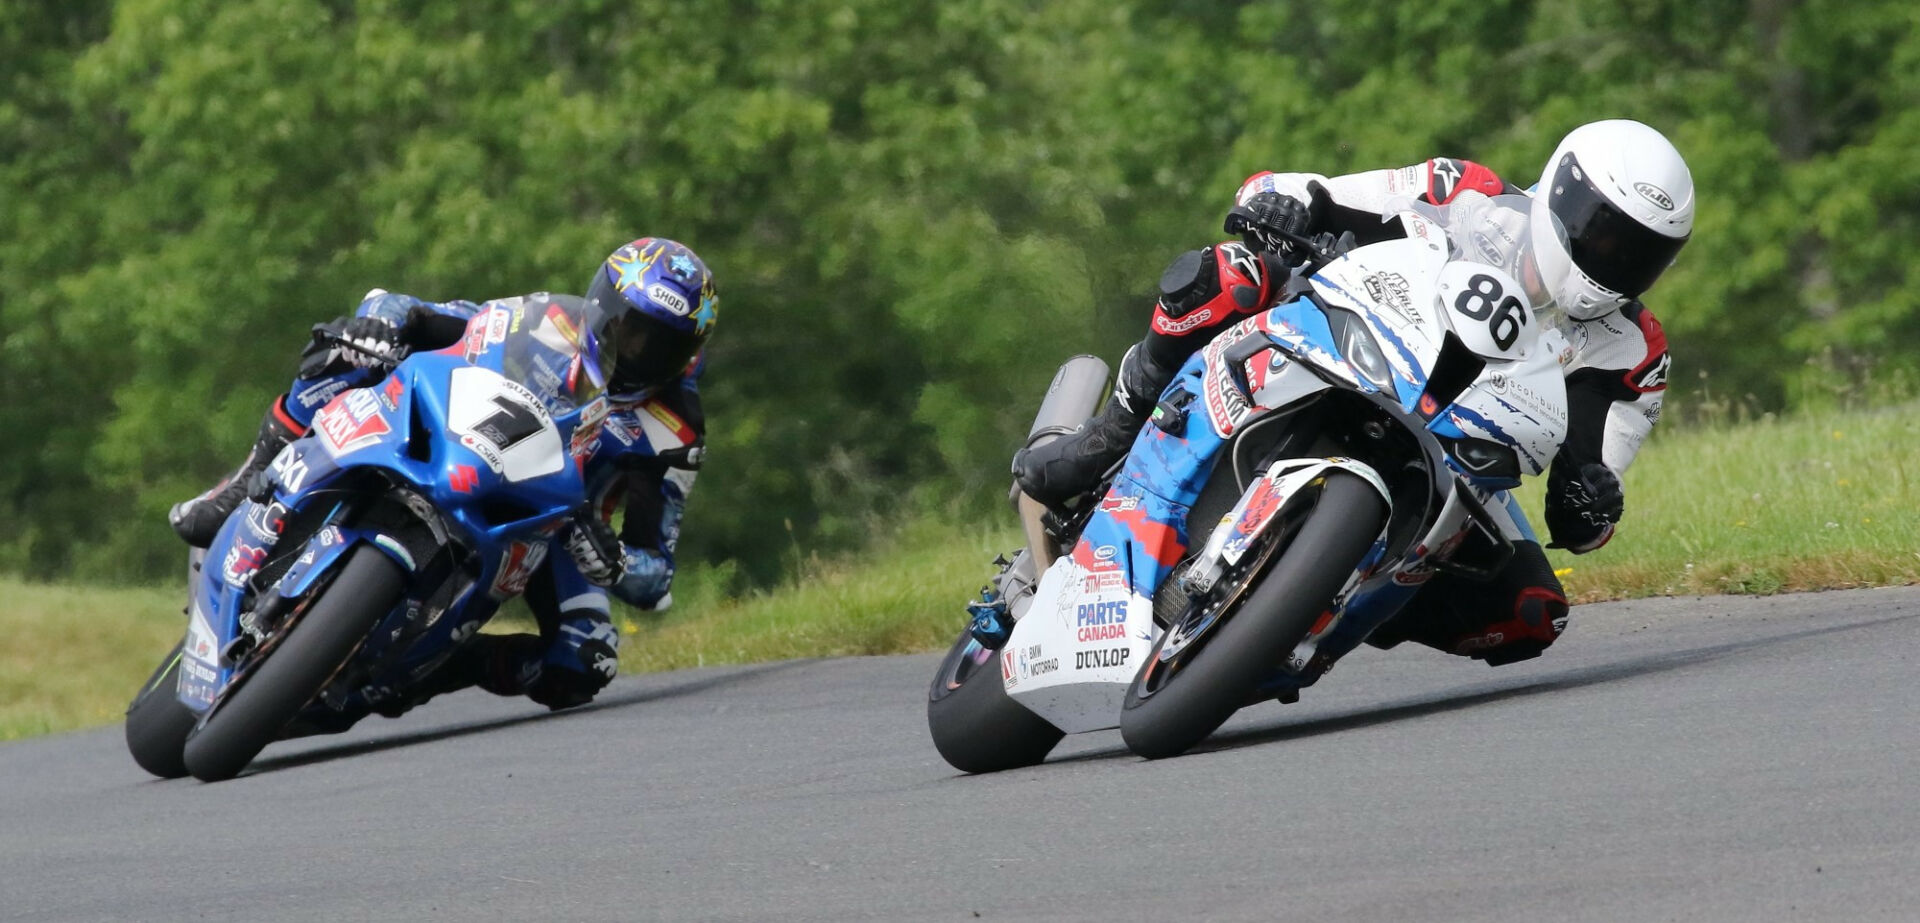 Ben Young (86) on his way to victory in the final laps of Canadian Superbike Race Two at Atlantic Motorsport Park. Young and Alex Dumas (1) exchanged the lead multiple times through the very hot 22-lap feature race. Photo by Rob O'Brien, courtesy CSBK/PMP.